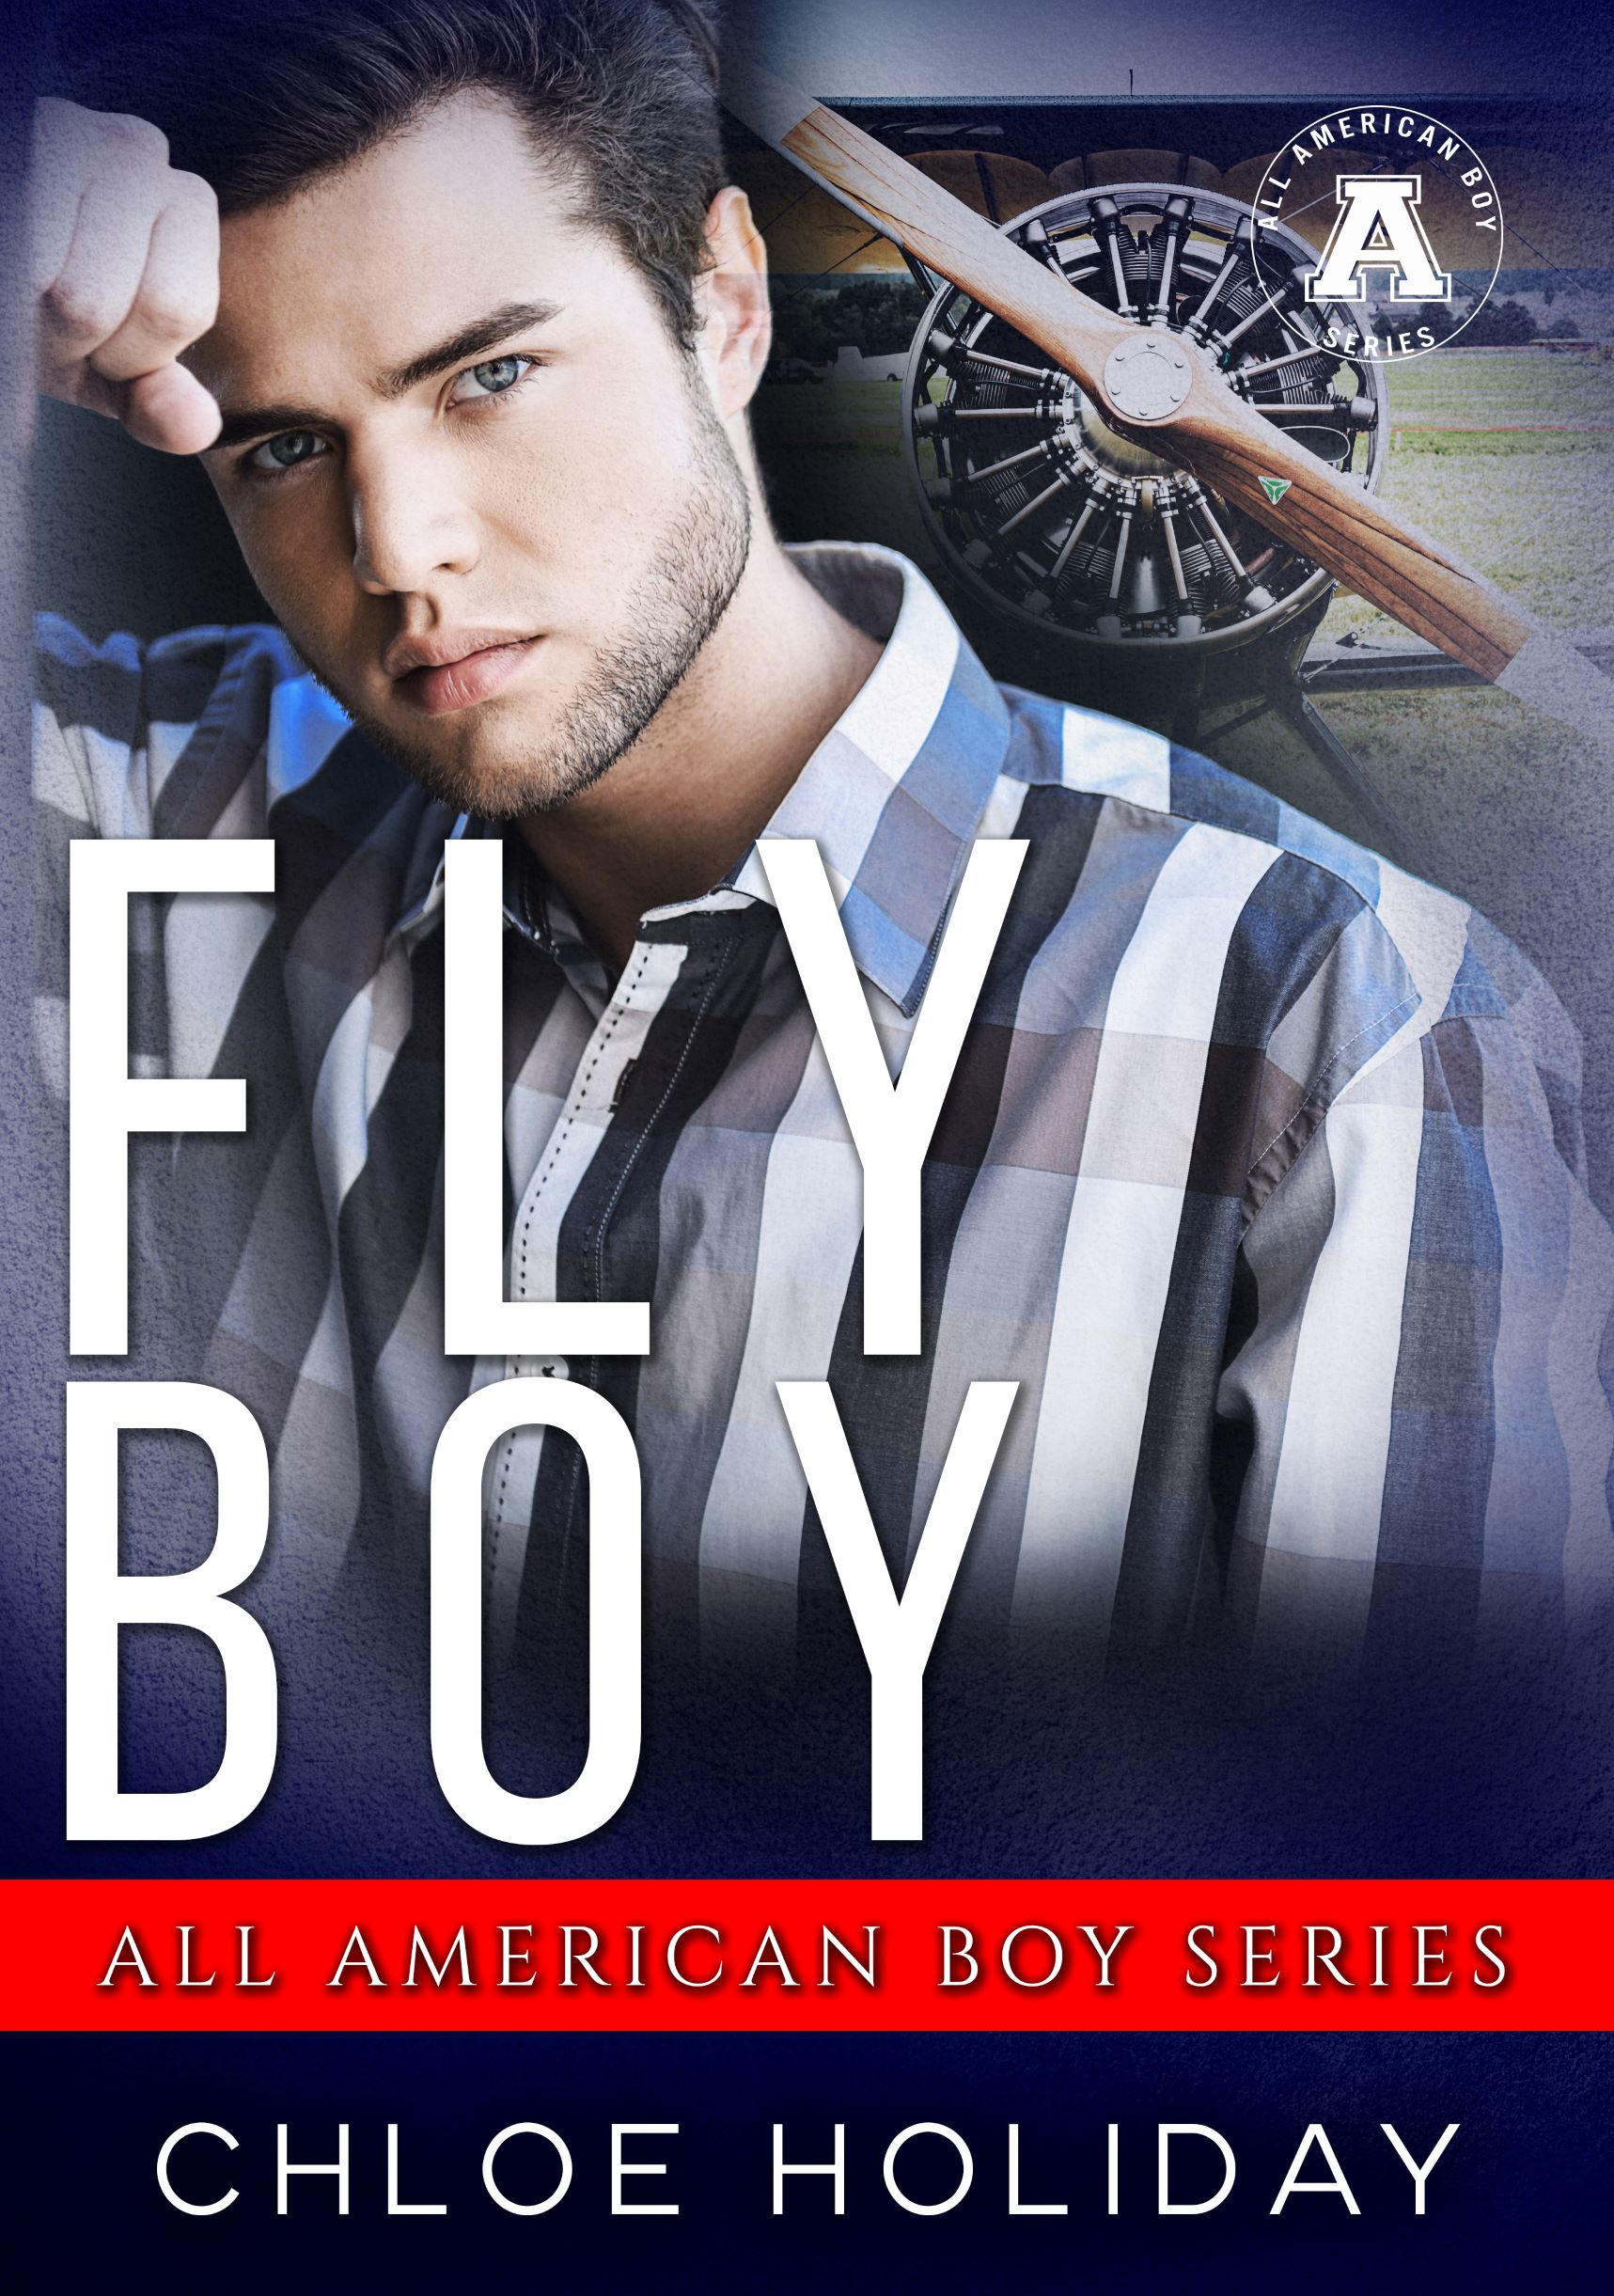 Fly Boy by Chloe Holiday, from the All American Boy Series 